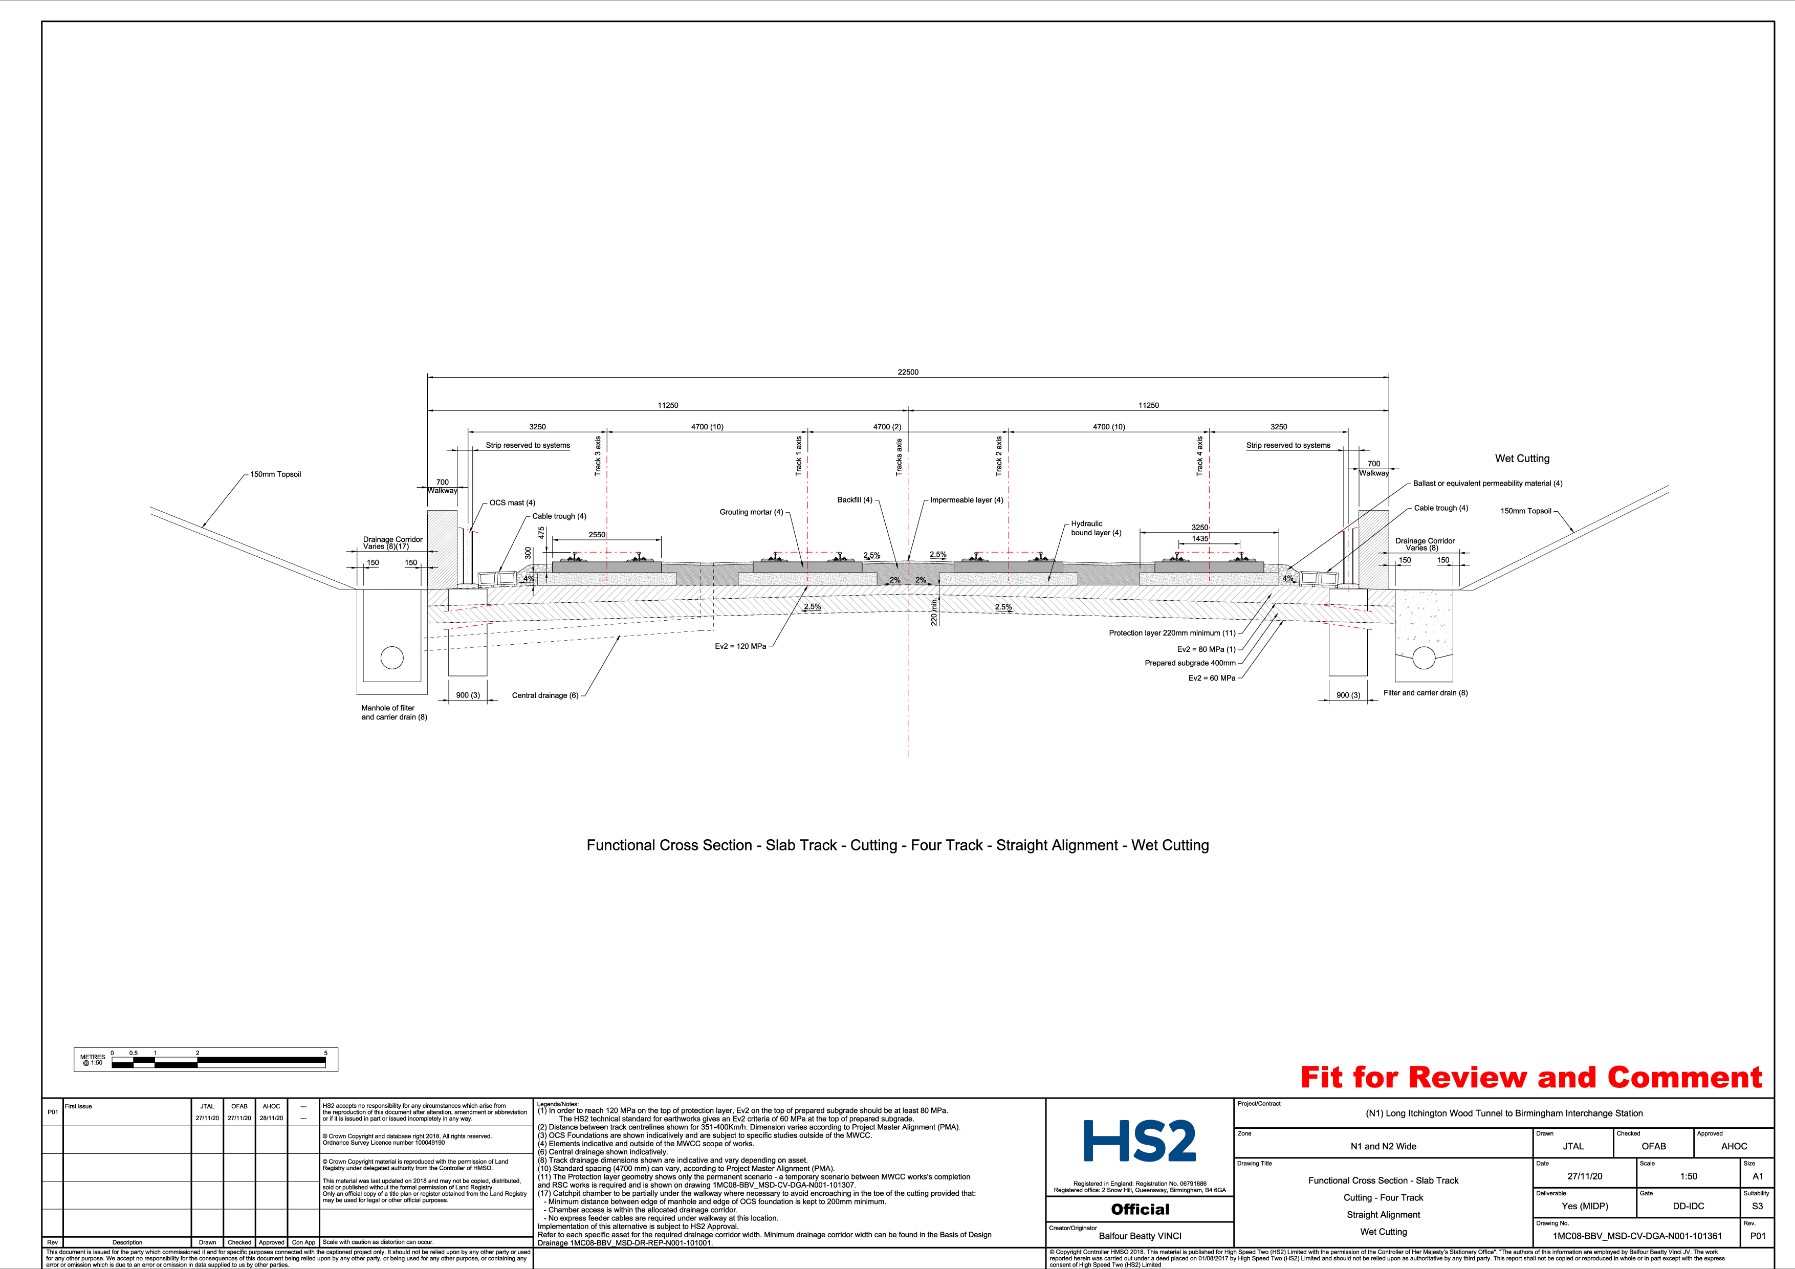 Map of  functional Cross Section Chainage 156+900 